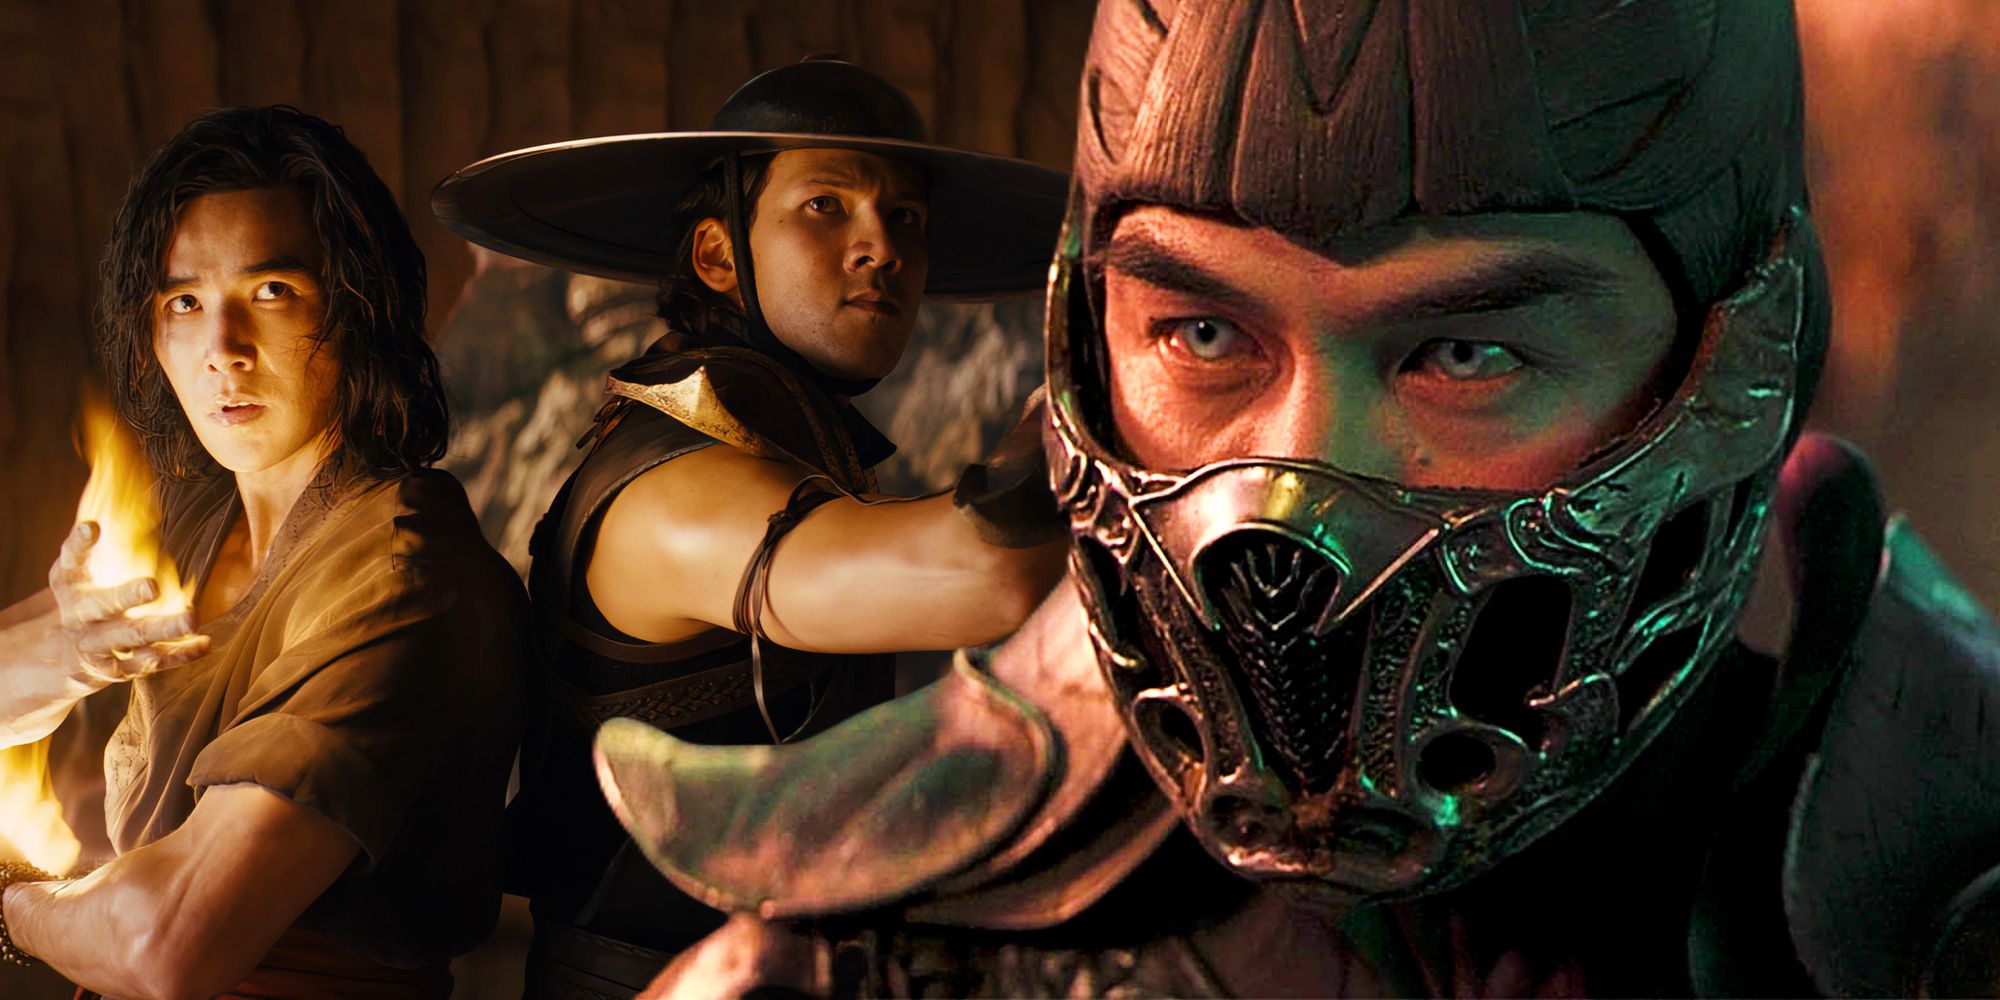 Mortal Kombat 2 Can Deliver On The First Film's Failed Scorpion Promise